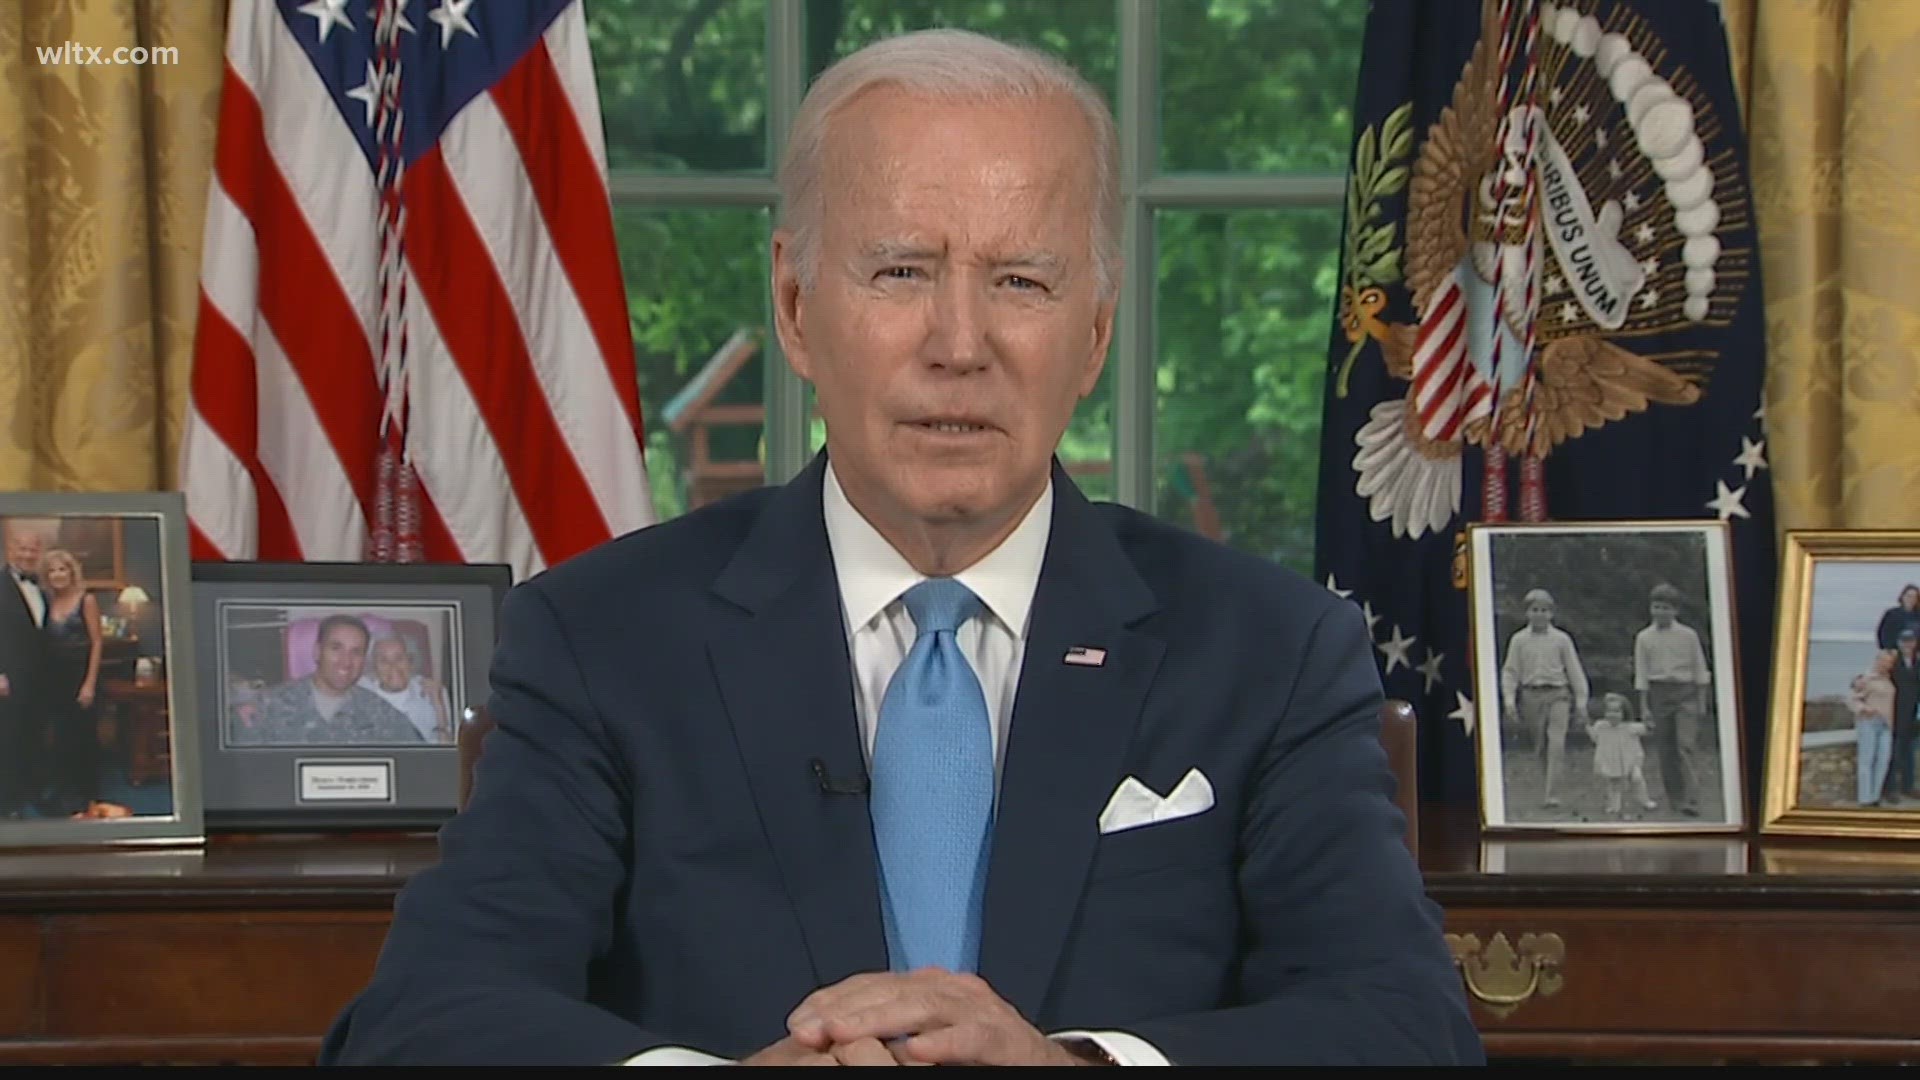 Biden is set to sign the budget agreement at the White House on Saturday with just two days to spare.